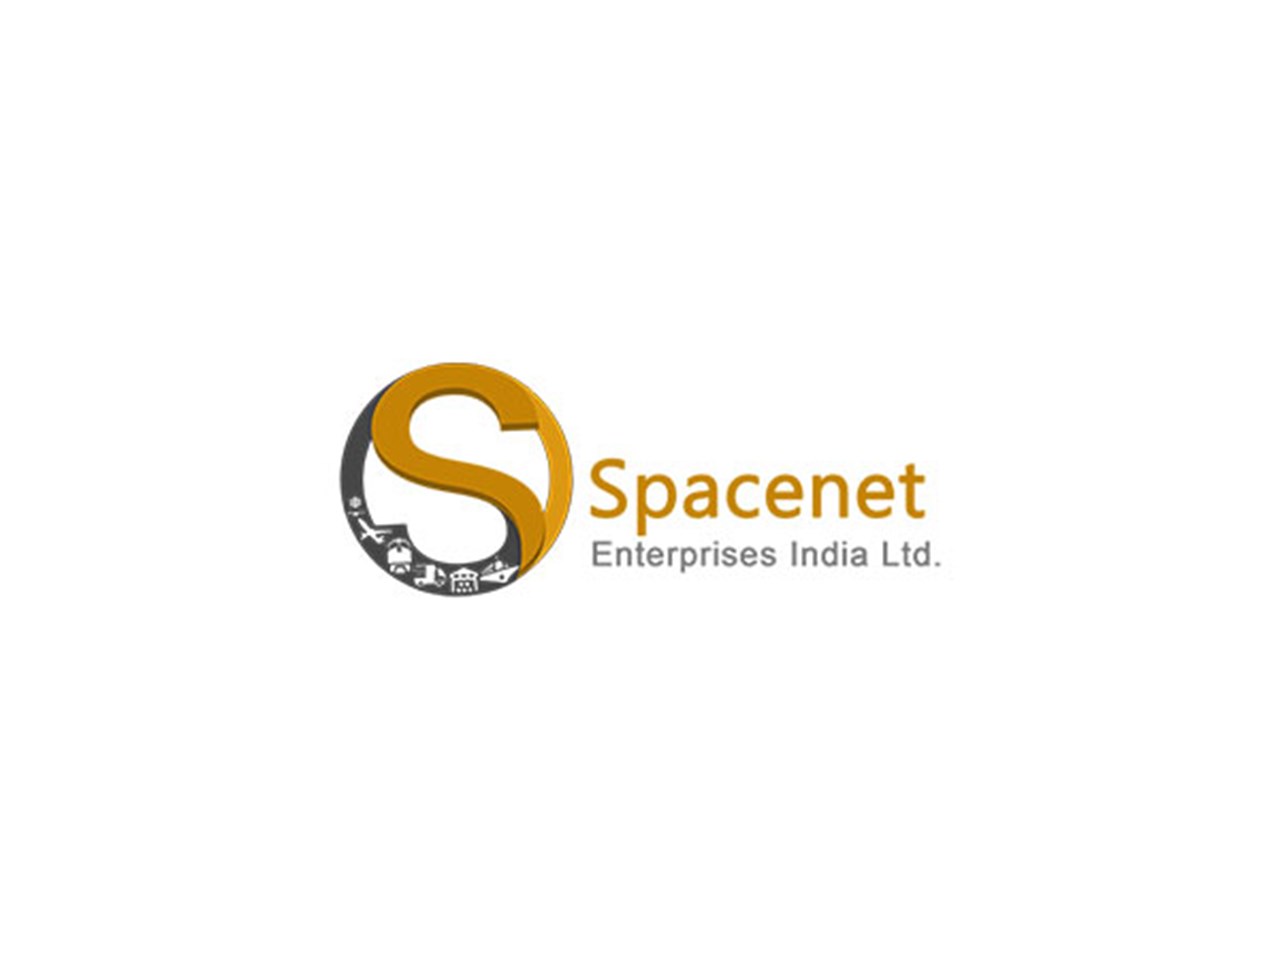 Spacenet Board Approves To Acquire 12%-15% Stake In New Age Gaming &Finance (GameFi) Company Startup String Metaverse Limited - CryptoInfoNet